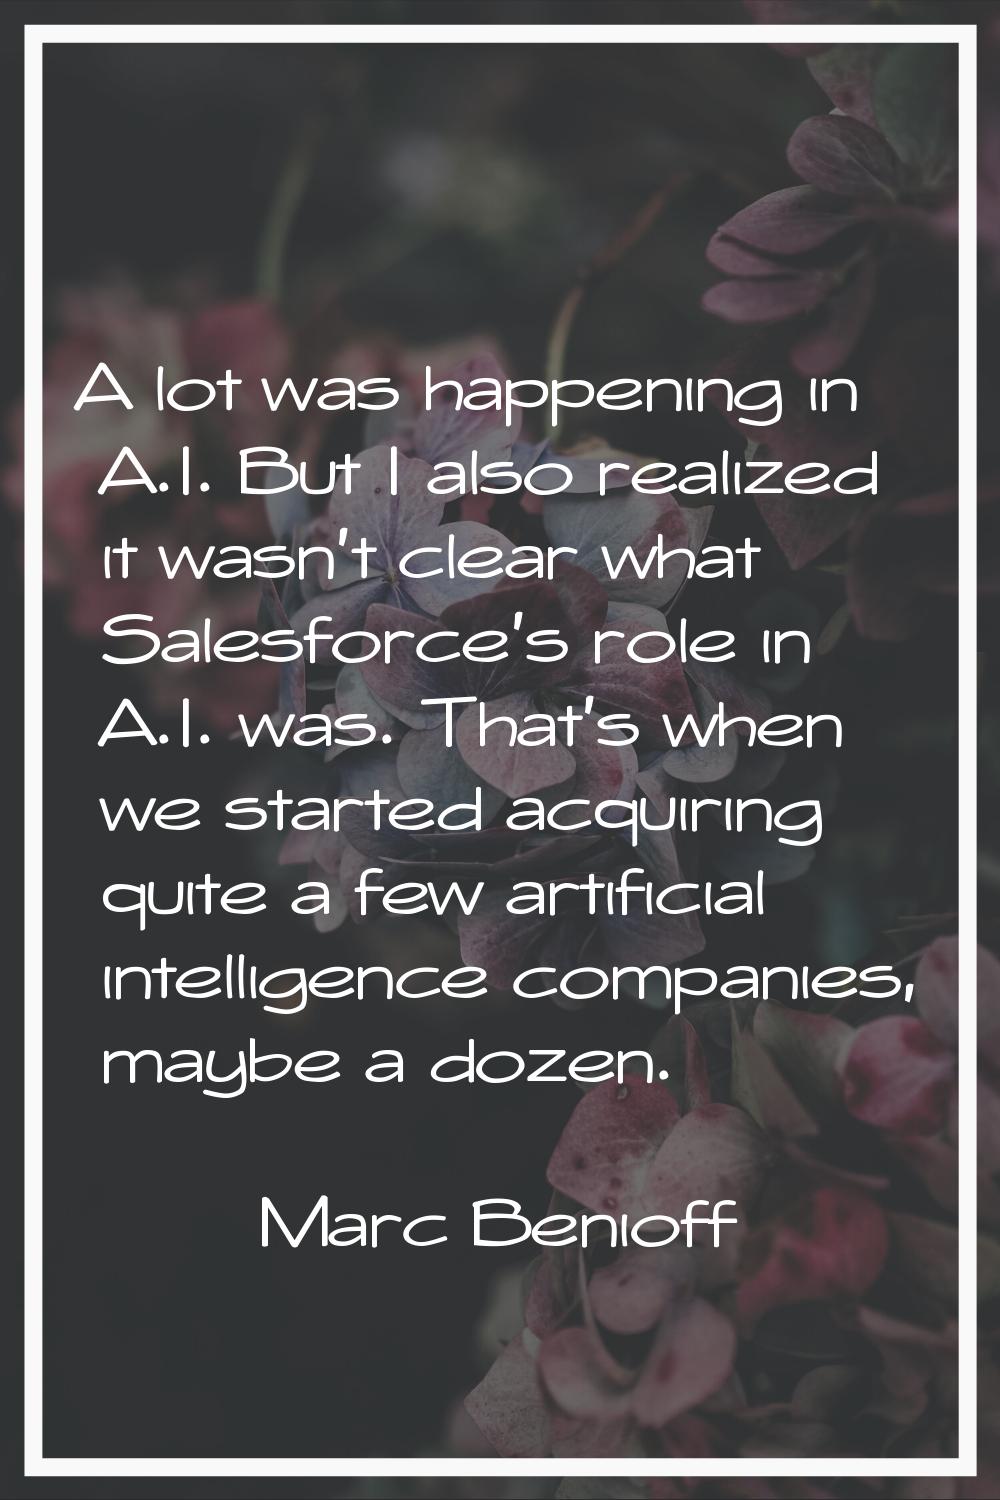 A lot was happening in A.I. But I also realized it wasn't clear what Salesforce's role in A.I. was.